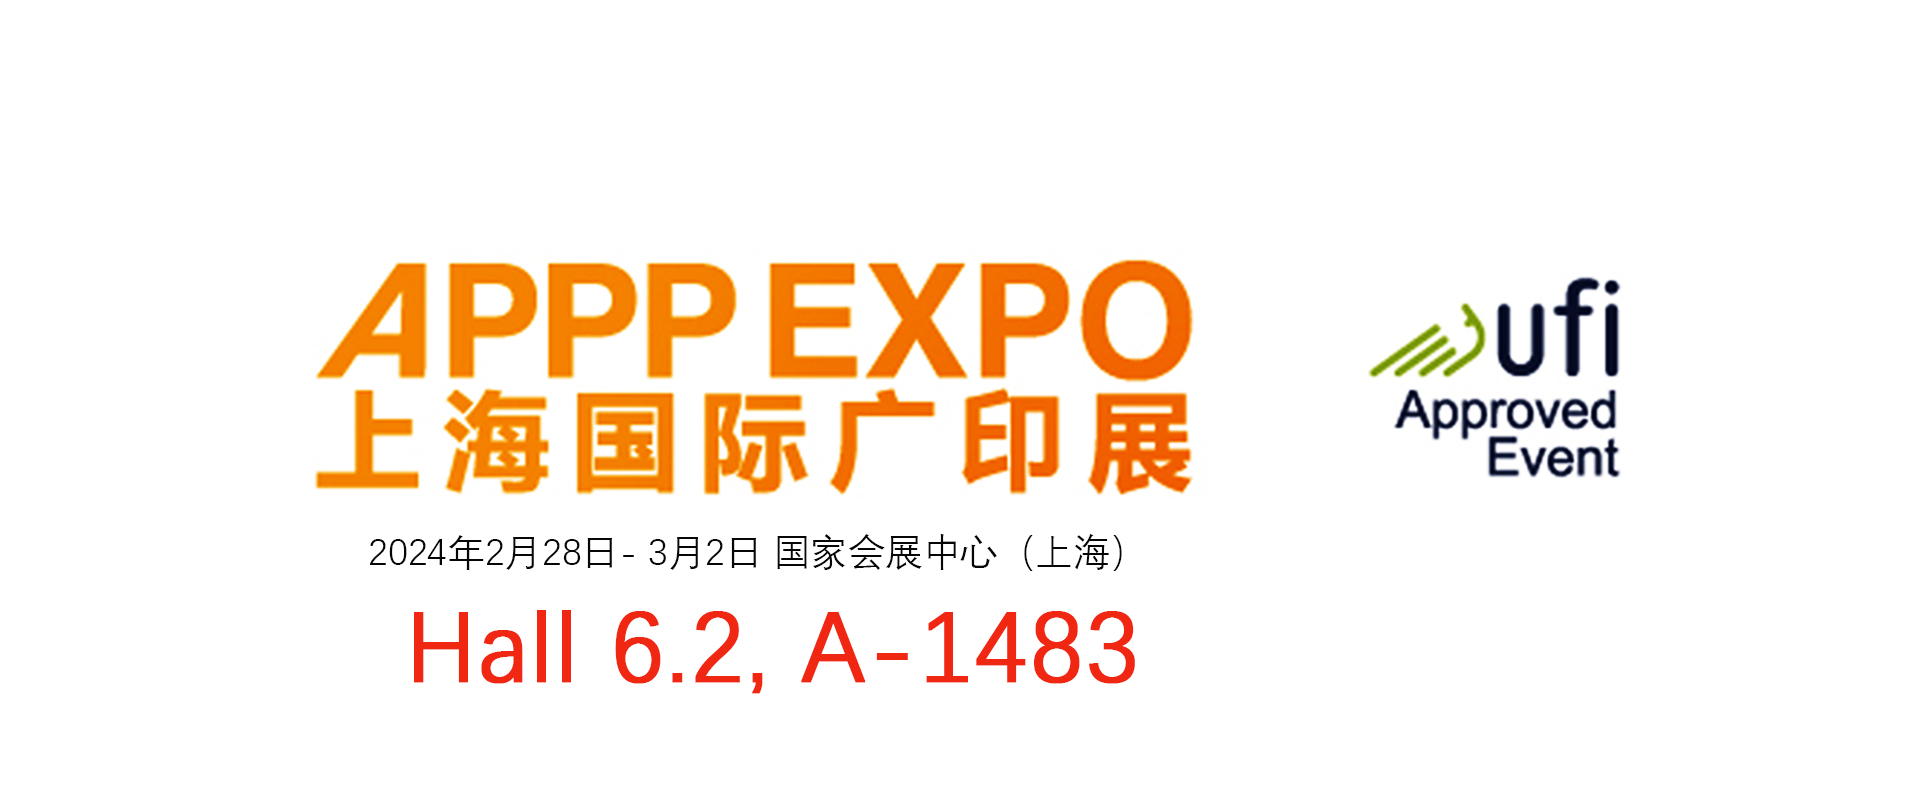 2024 shanghai APPP EXPO, Our Booth is Hall 6.2, A-1483